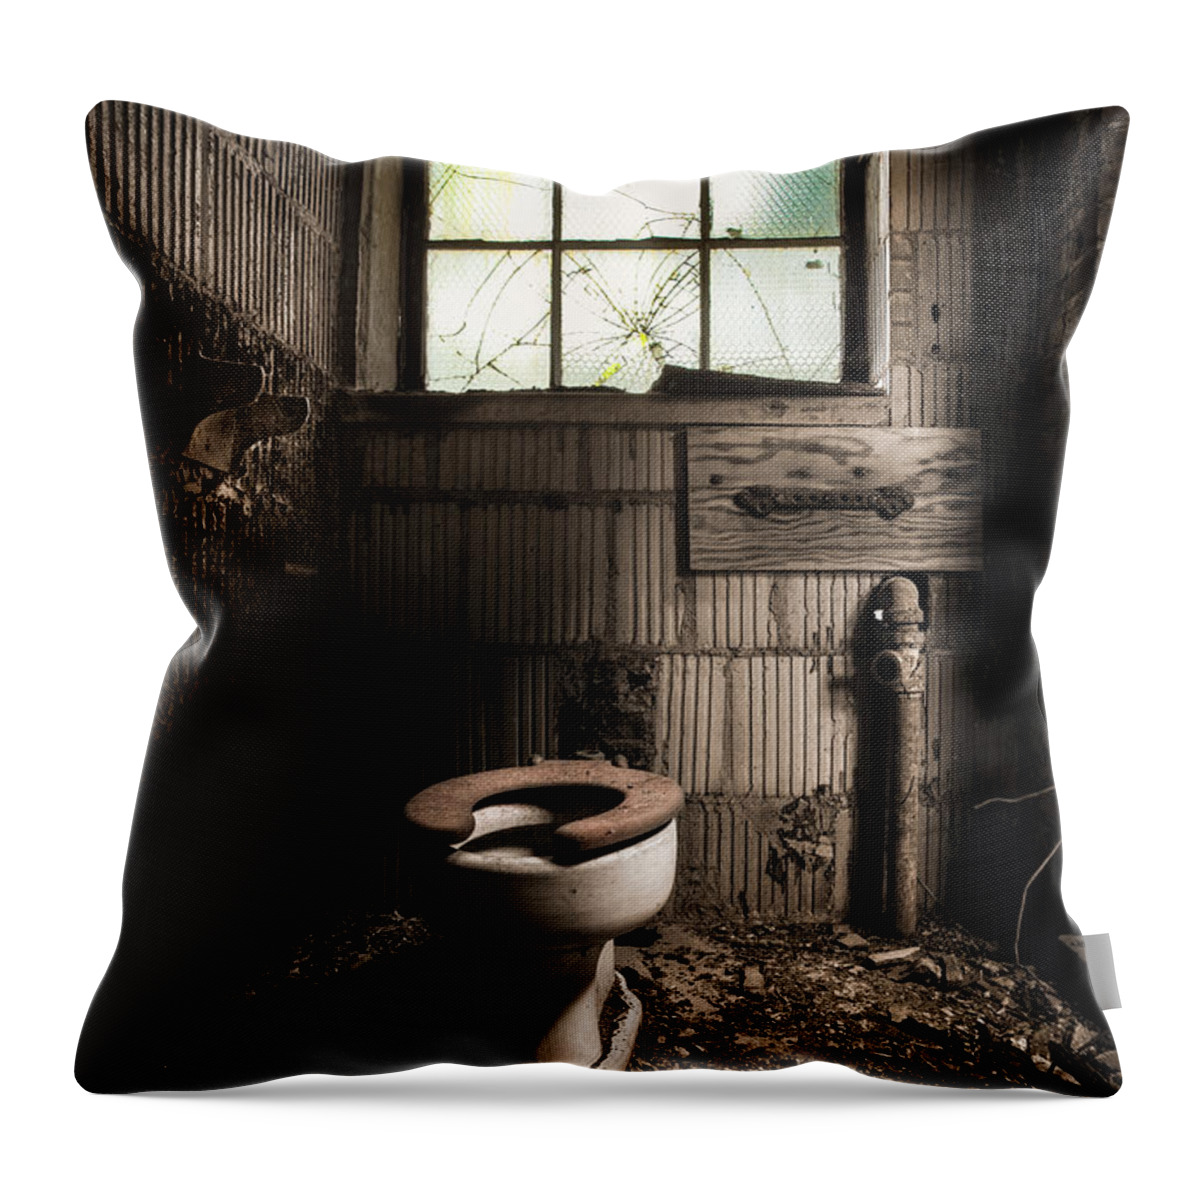 Toilets Throw Pillow featuring the photograph The Old Thinking Room - Abandoned Restroom And Toilet by Gary Heller